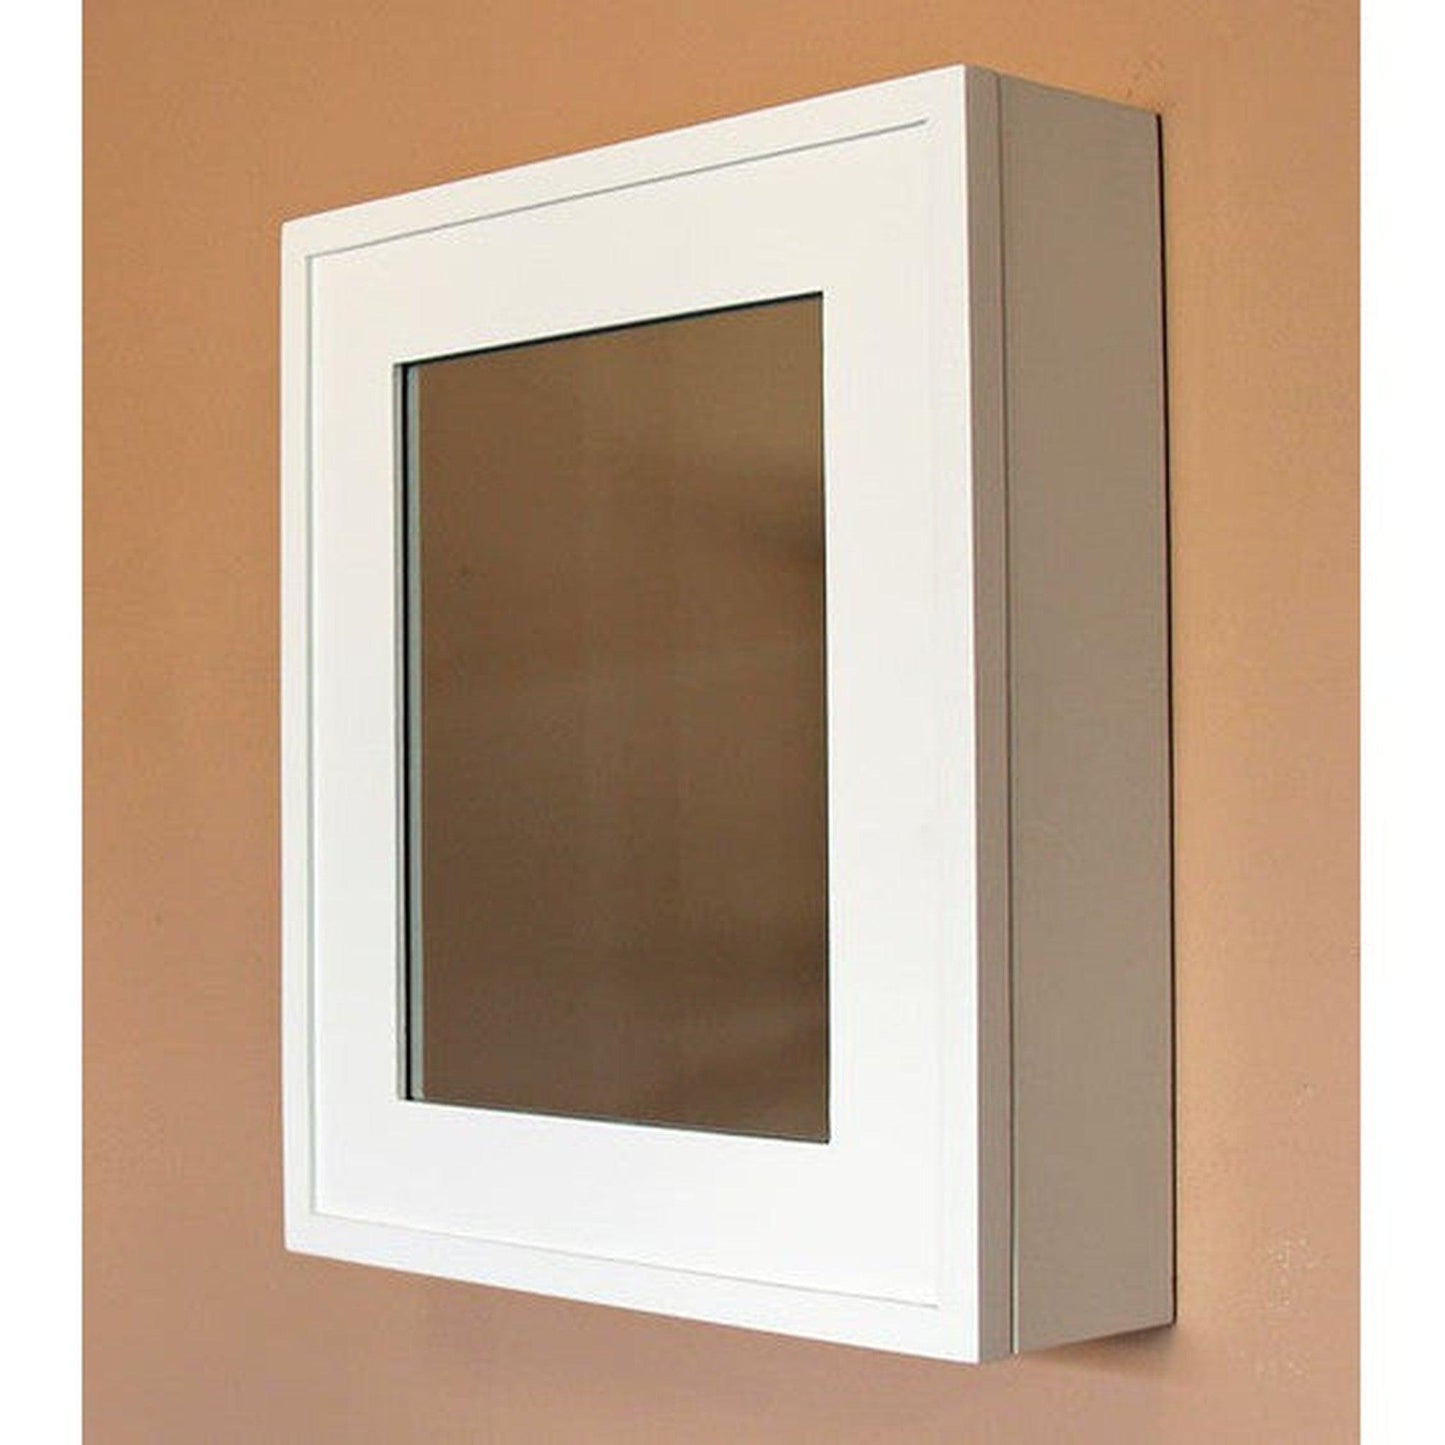 Fox Hollow Furnishings 20" x 17" White Contemporary Wall Mount Picture Frame Medicine Cabinet With Mirror and Black 8" x 10" Cabinet